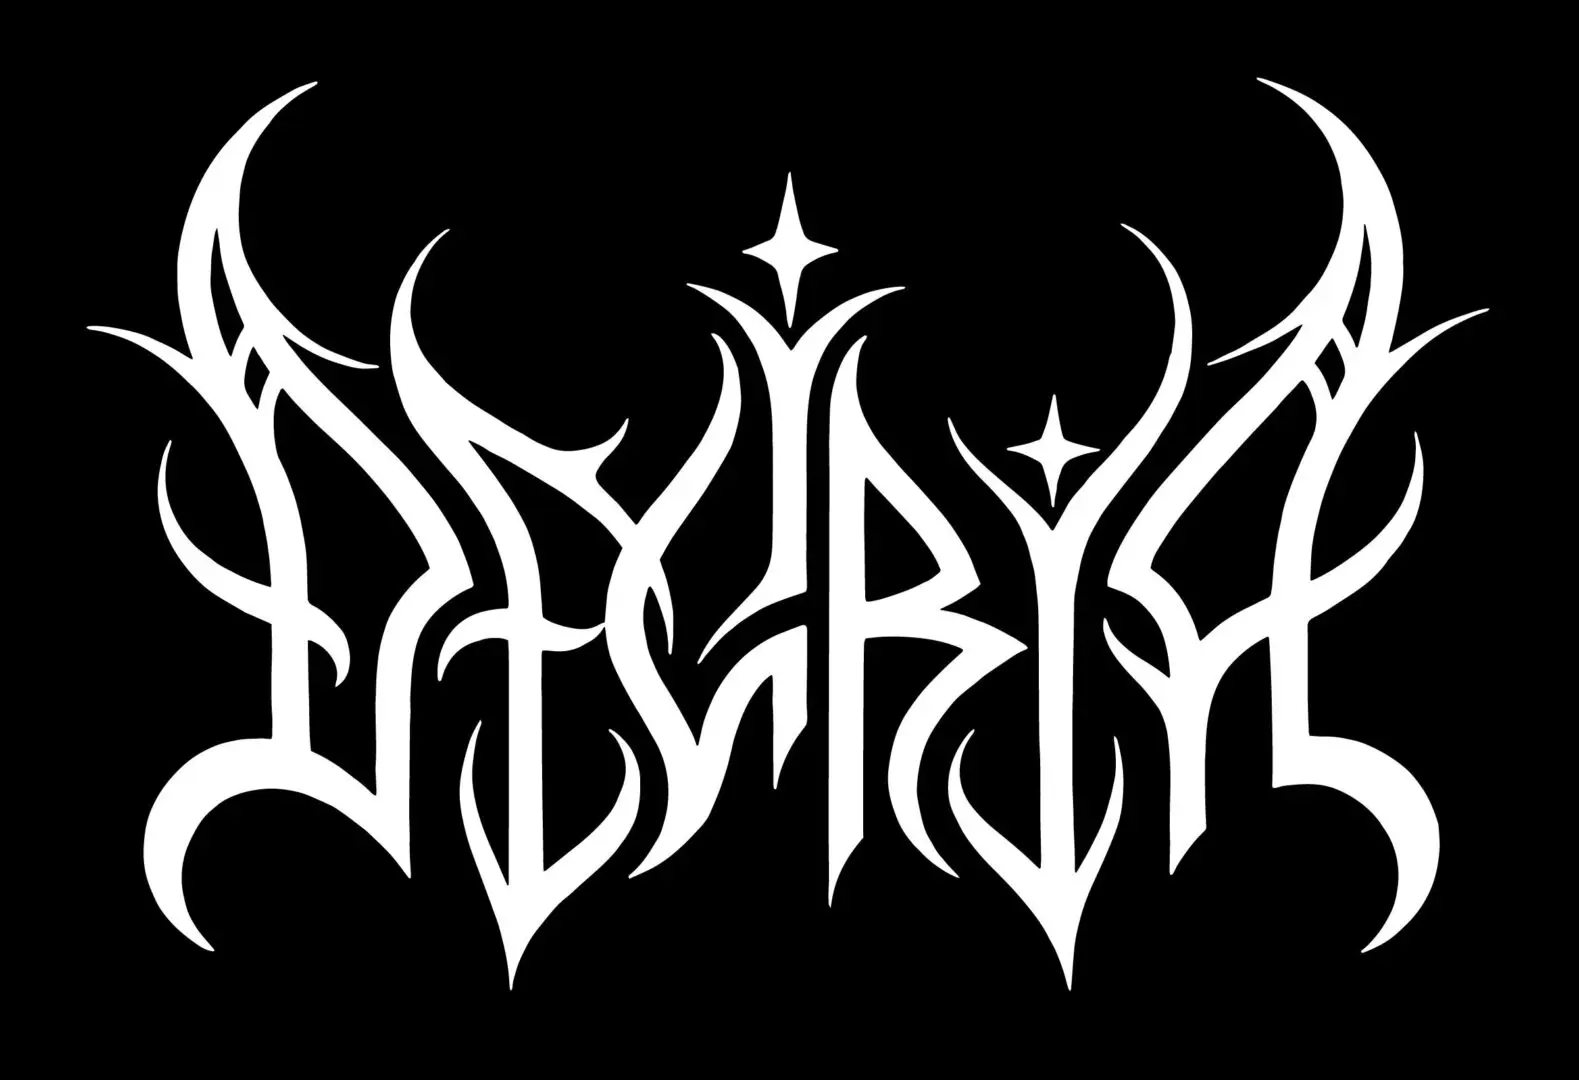 A black and white image of the logo for Deliria.